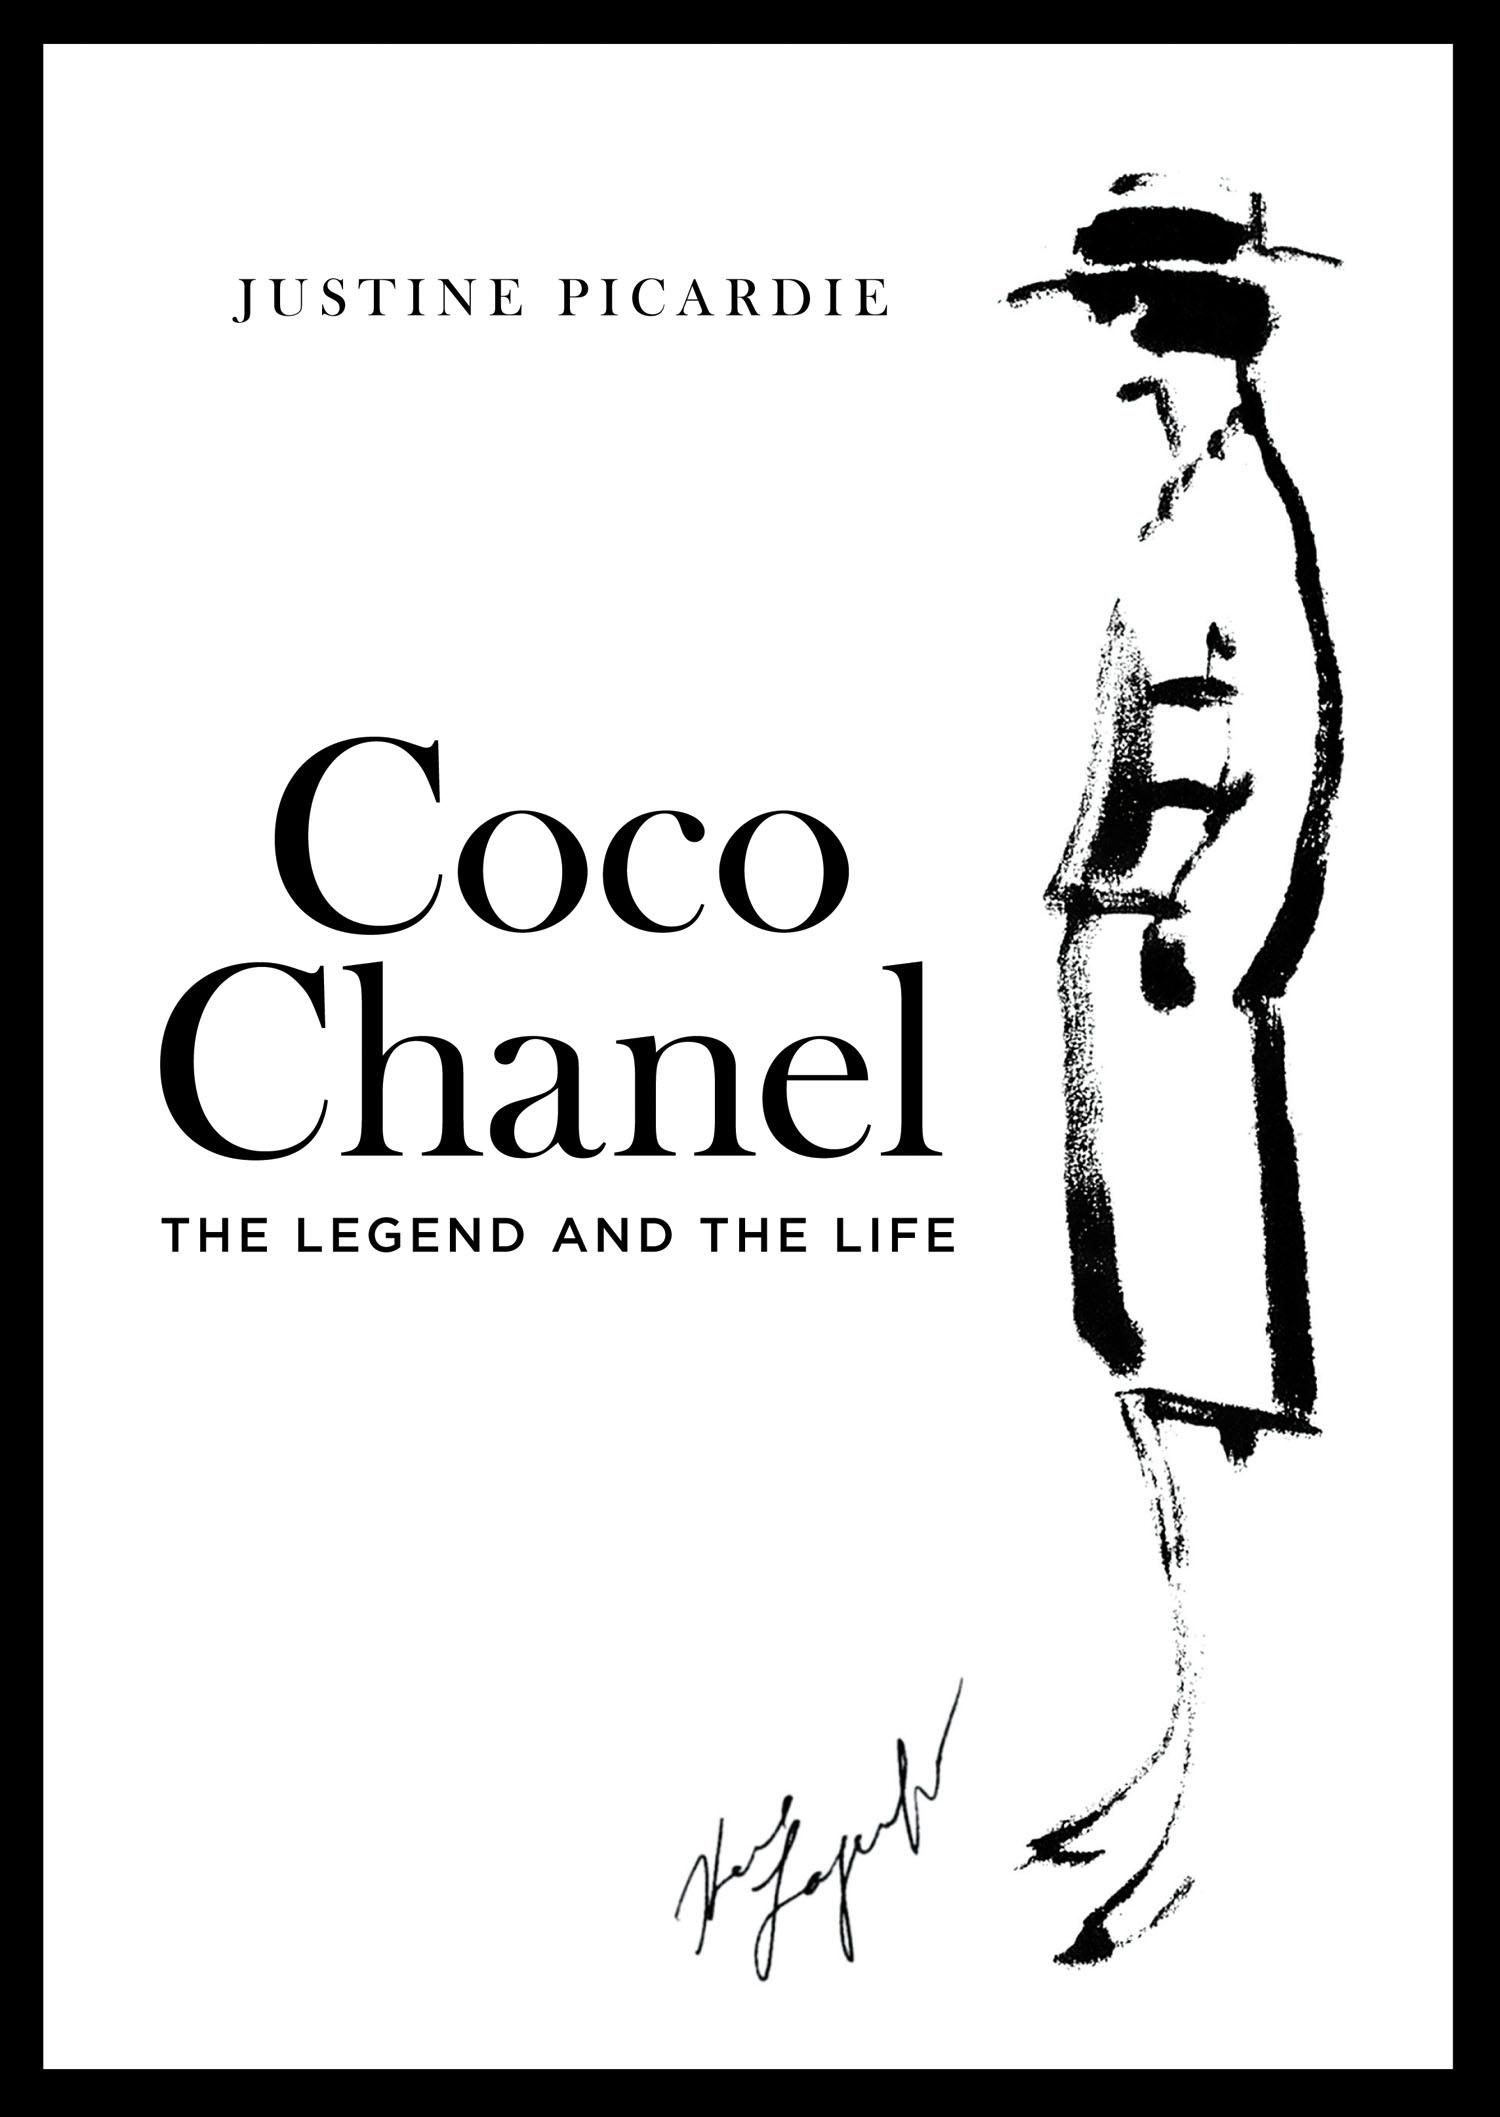 Coco Chanel | The Legend and the Life | Justine Picardie | Taschenbuch | 345 S. | Englisch | 2011 | Harper Collins Publ. UK | EAN 9780007318995 - Picardie, Justine